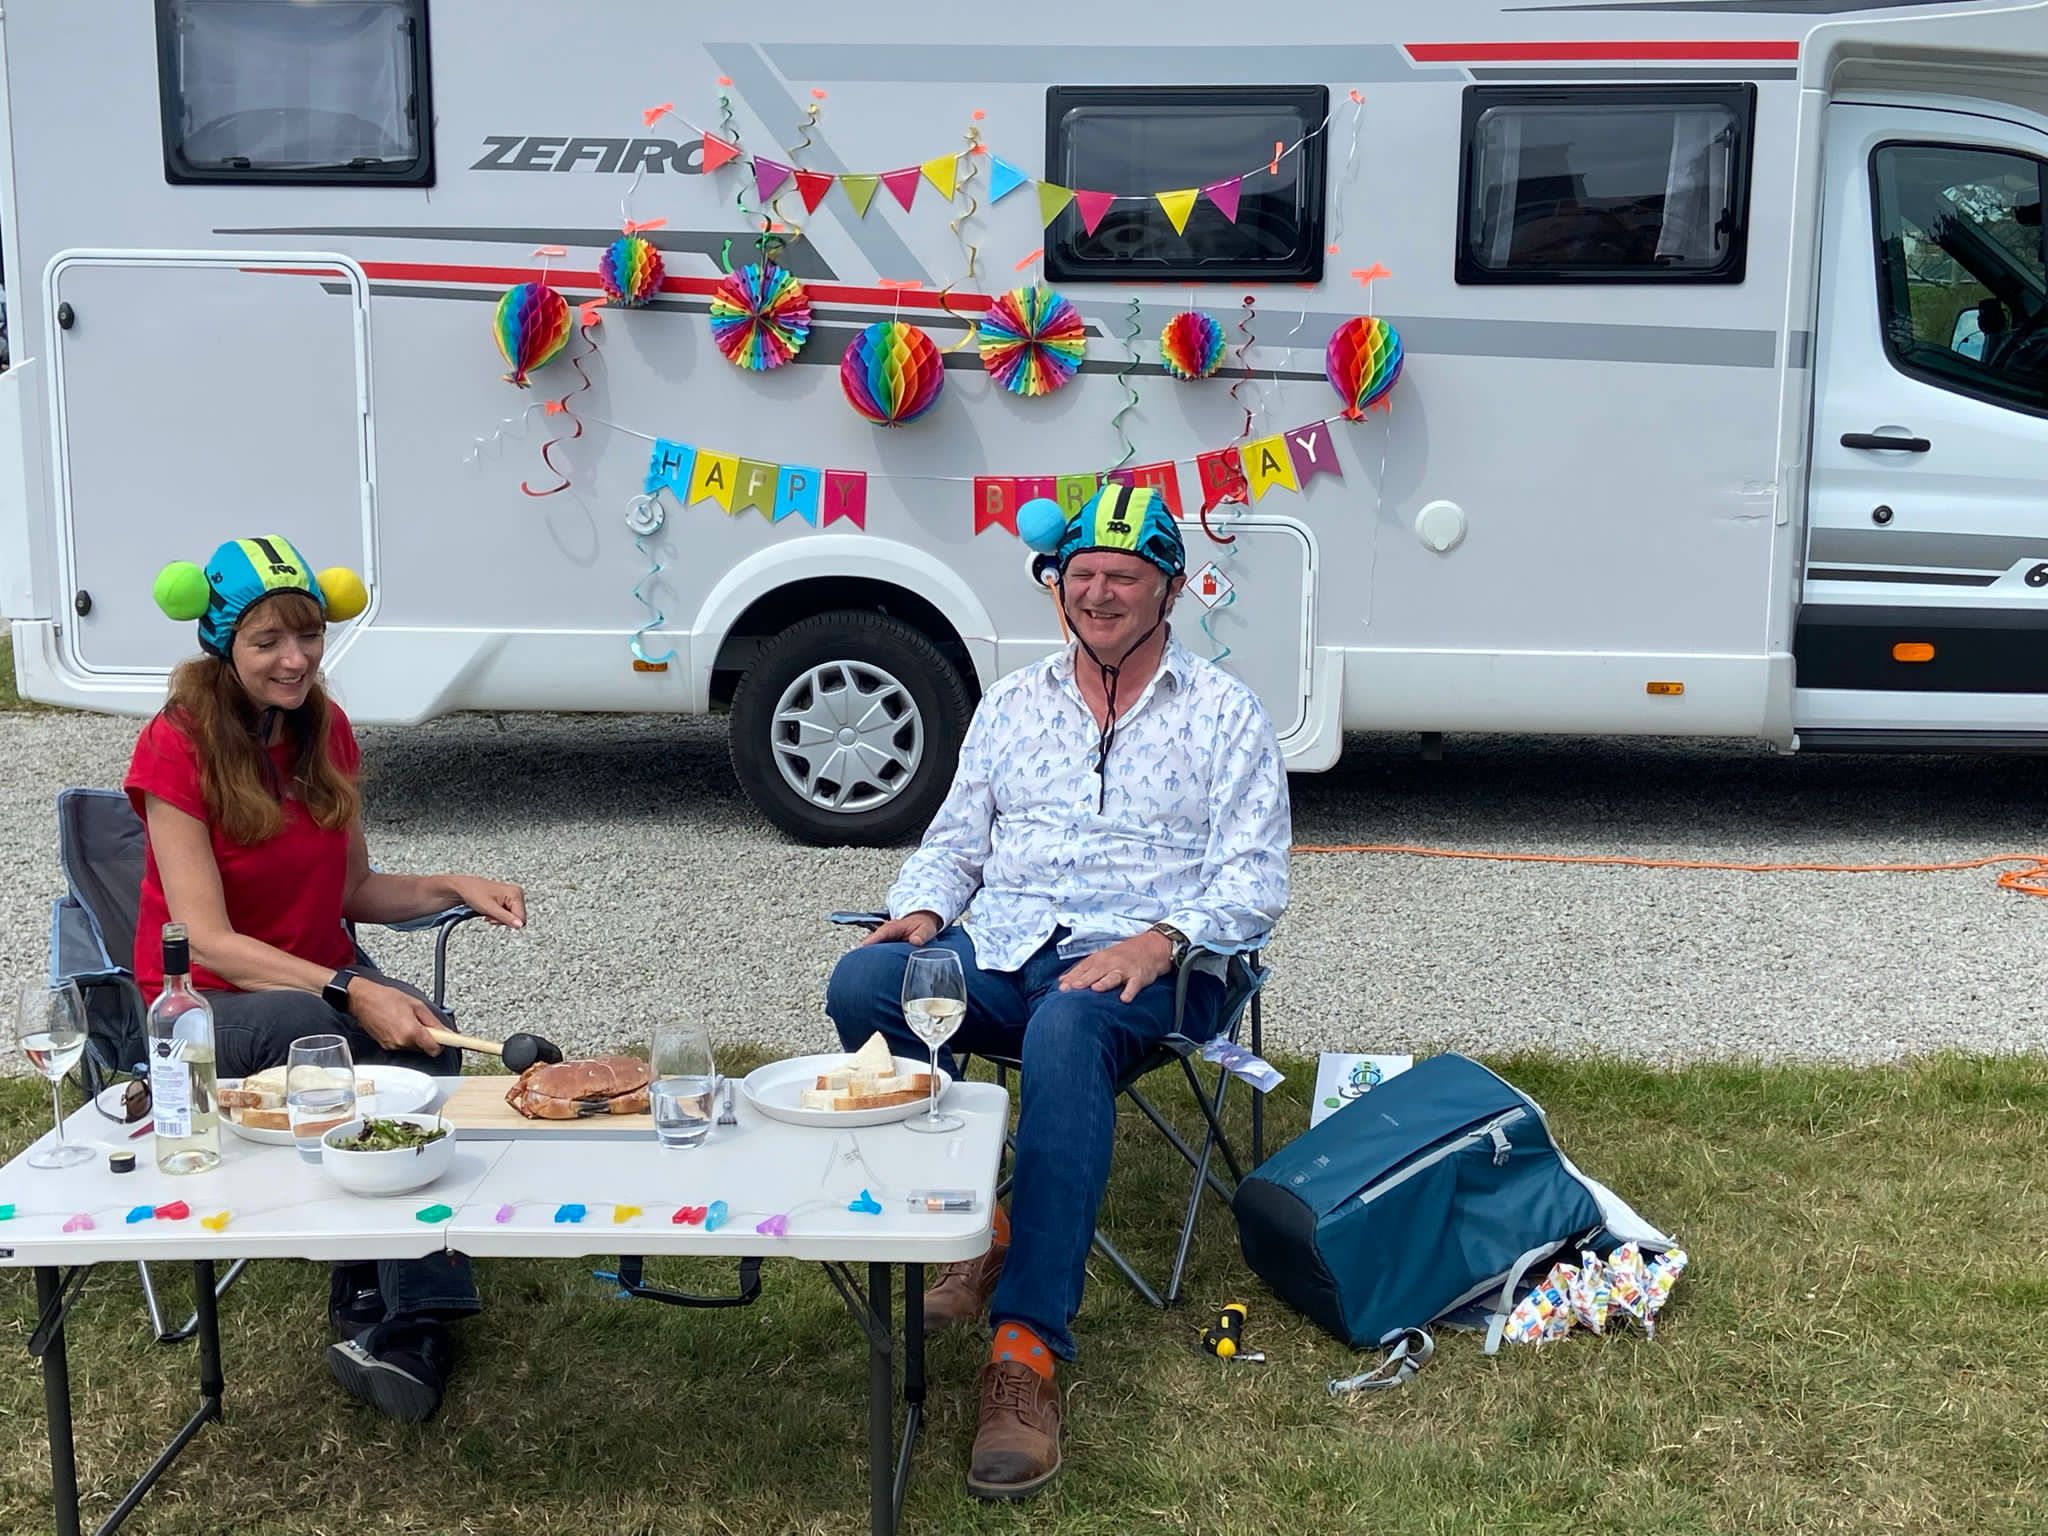 Paul Merton & Suki Webster sitting at a table outside their motorhome with a Happy Birthday banner behind them (Paul Merton & Suki Webster/PA)